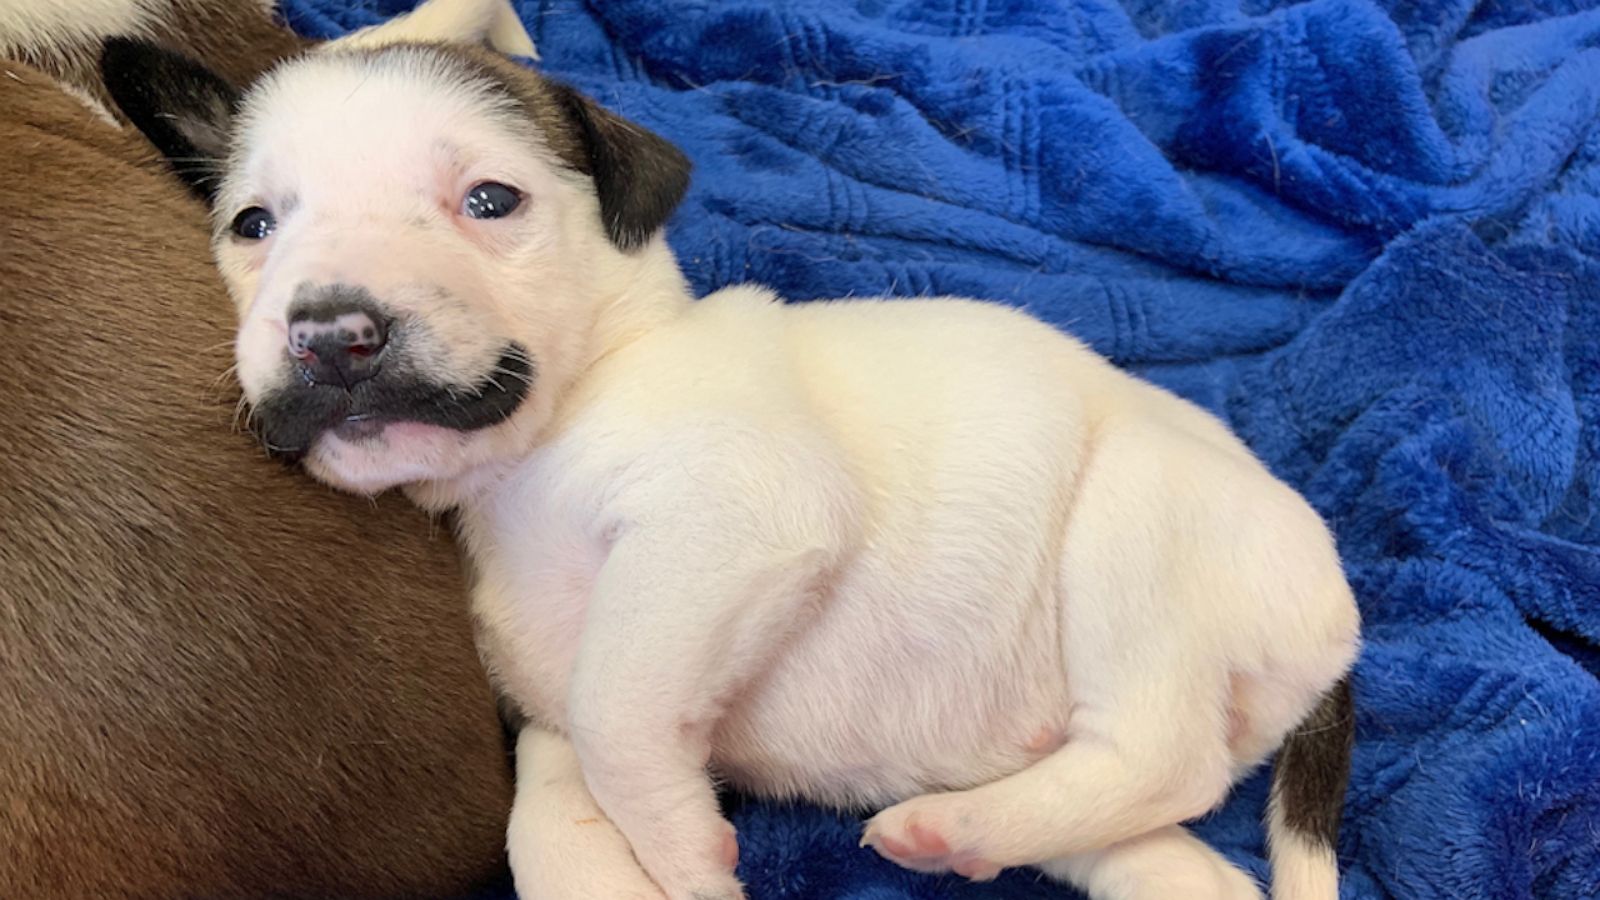 VIDEO: Adorable puppy born with fur mustache is seeking a forever home